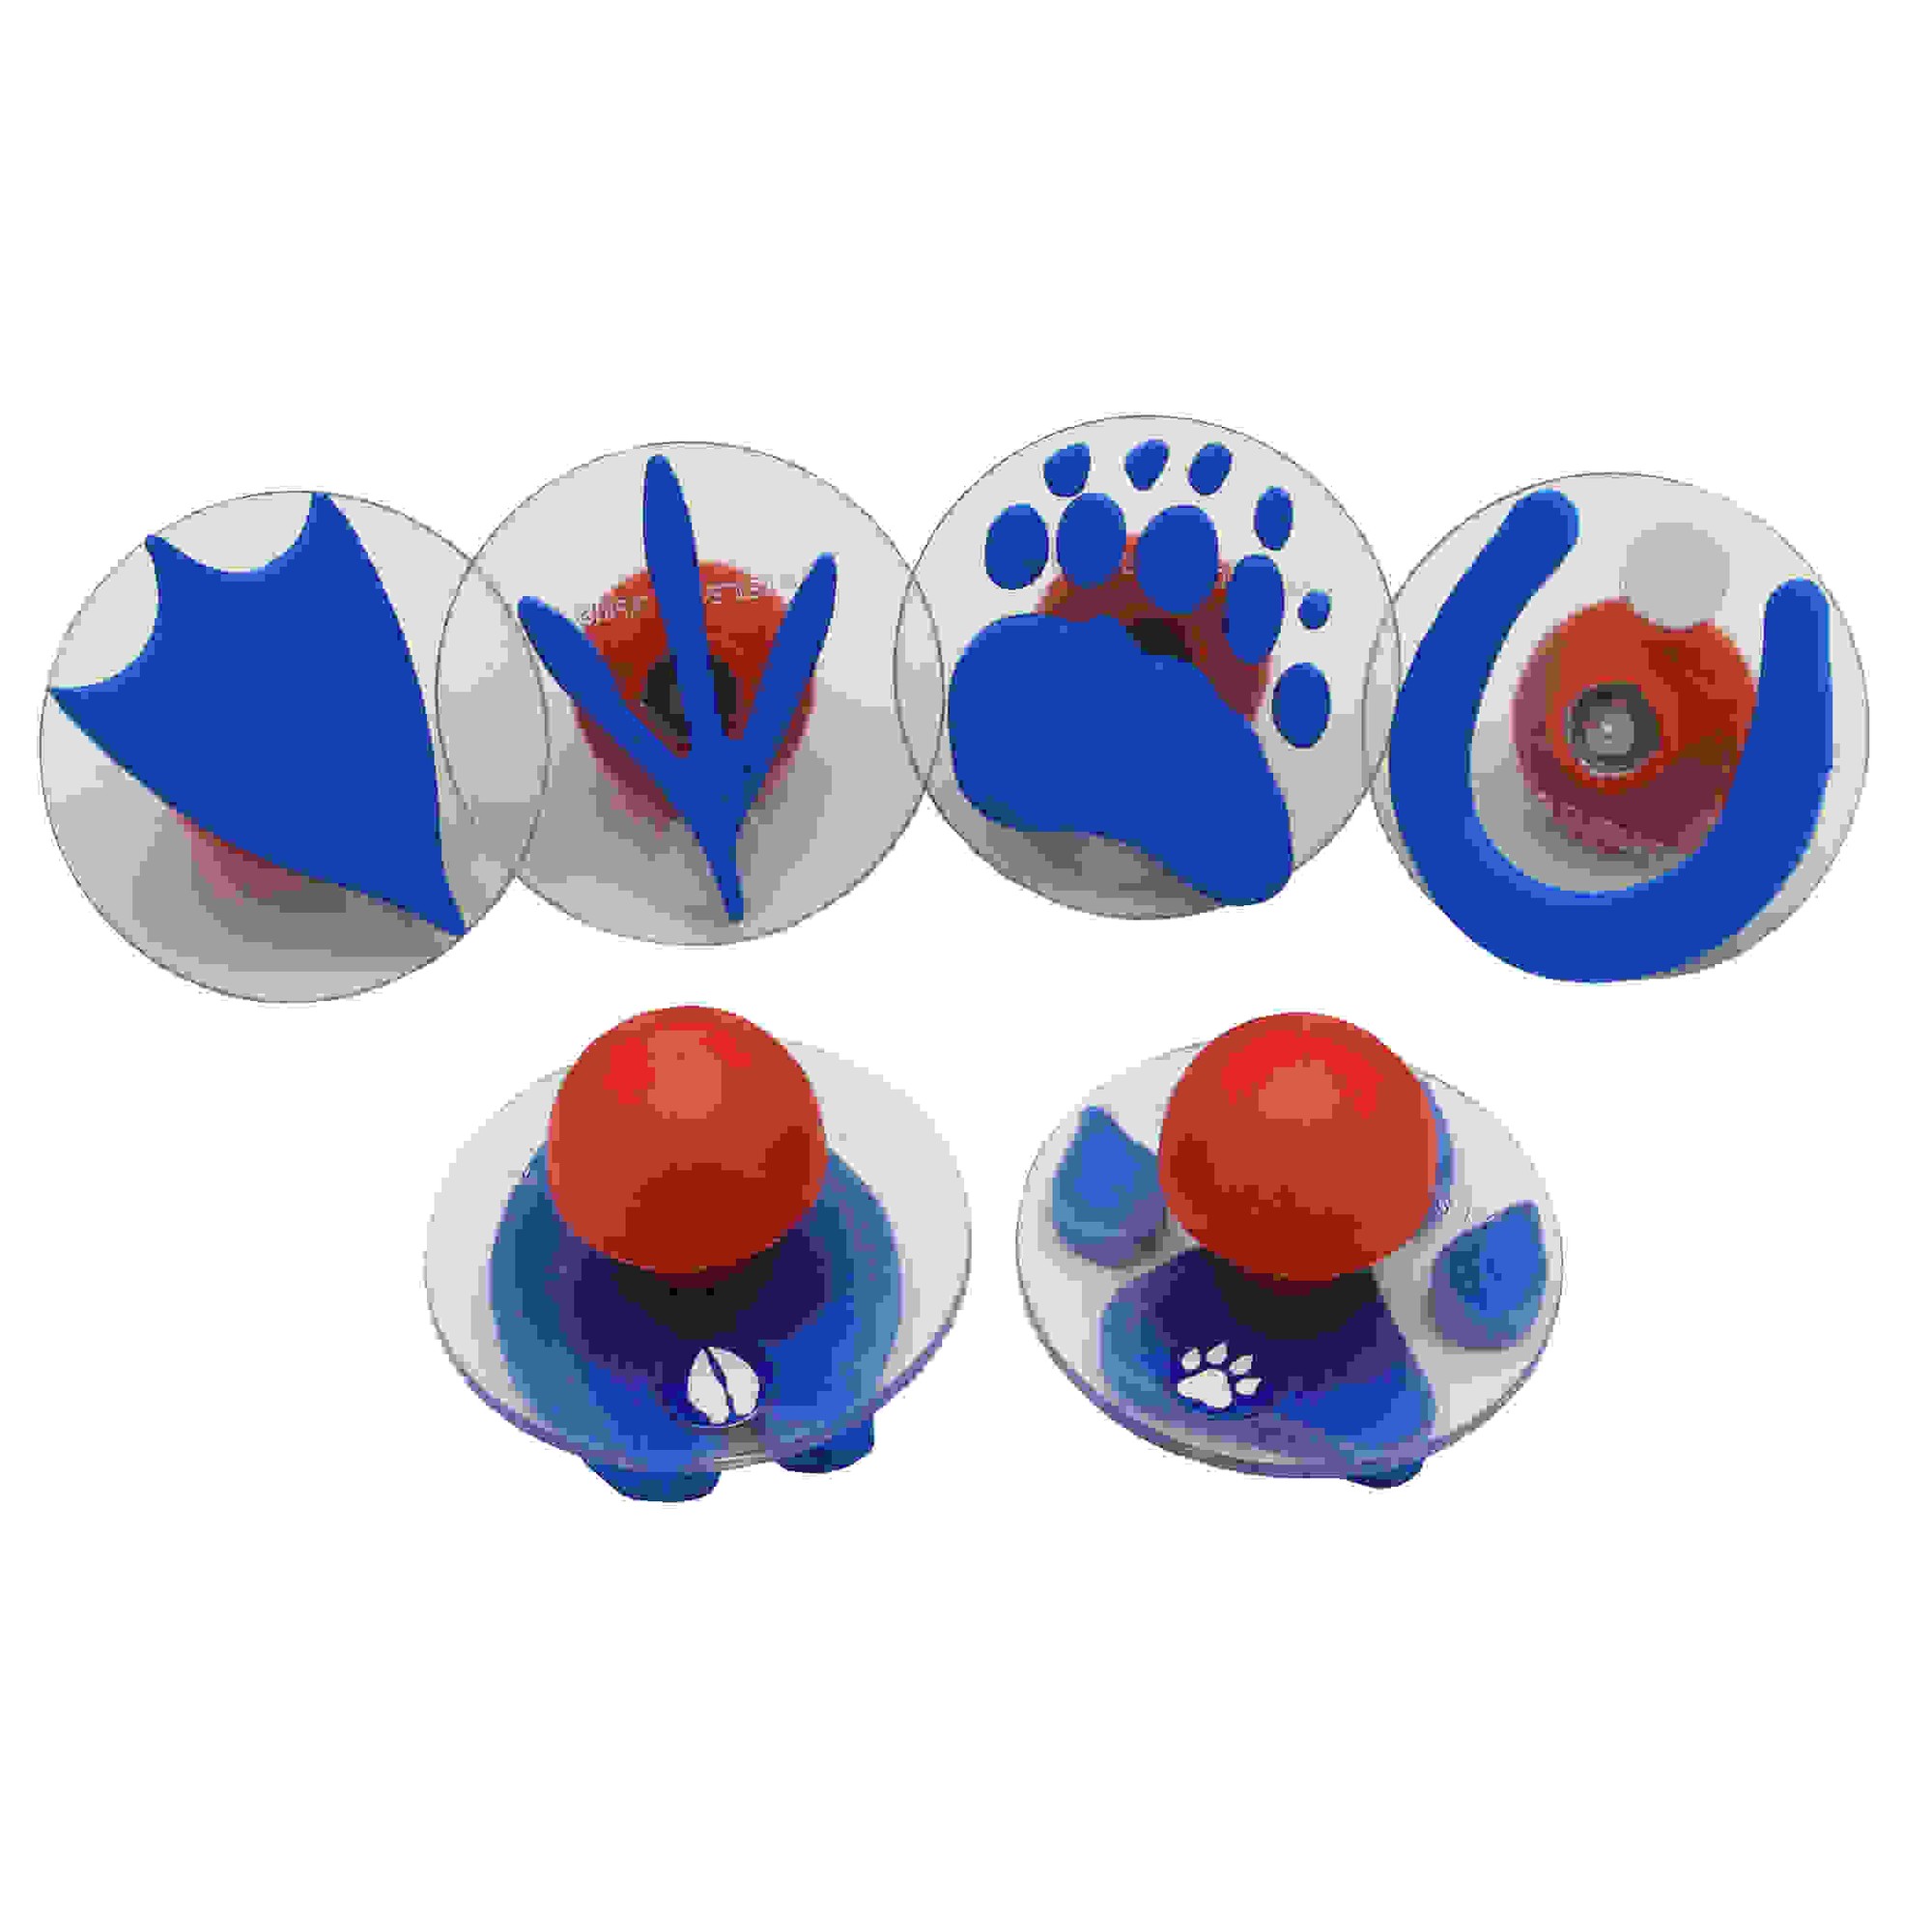 Giant Stampers - Paw Prints - Set of 6